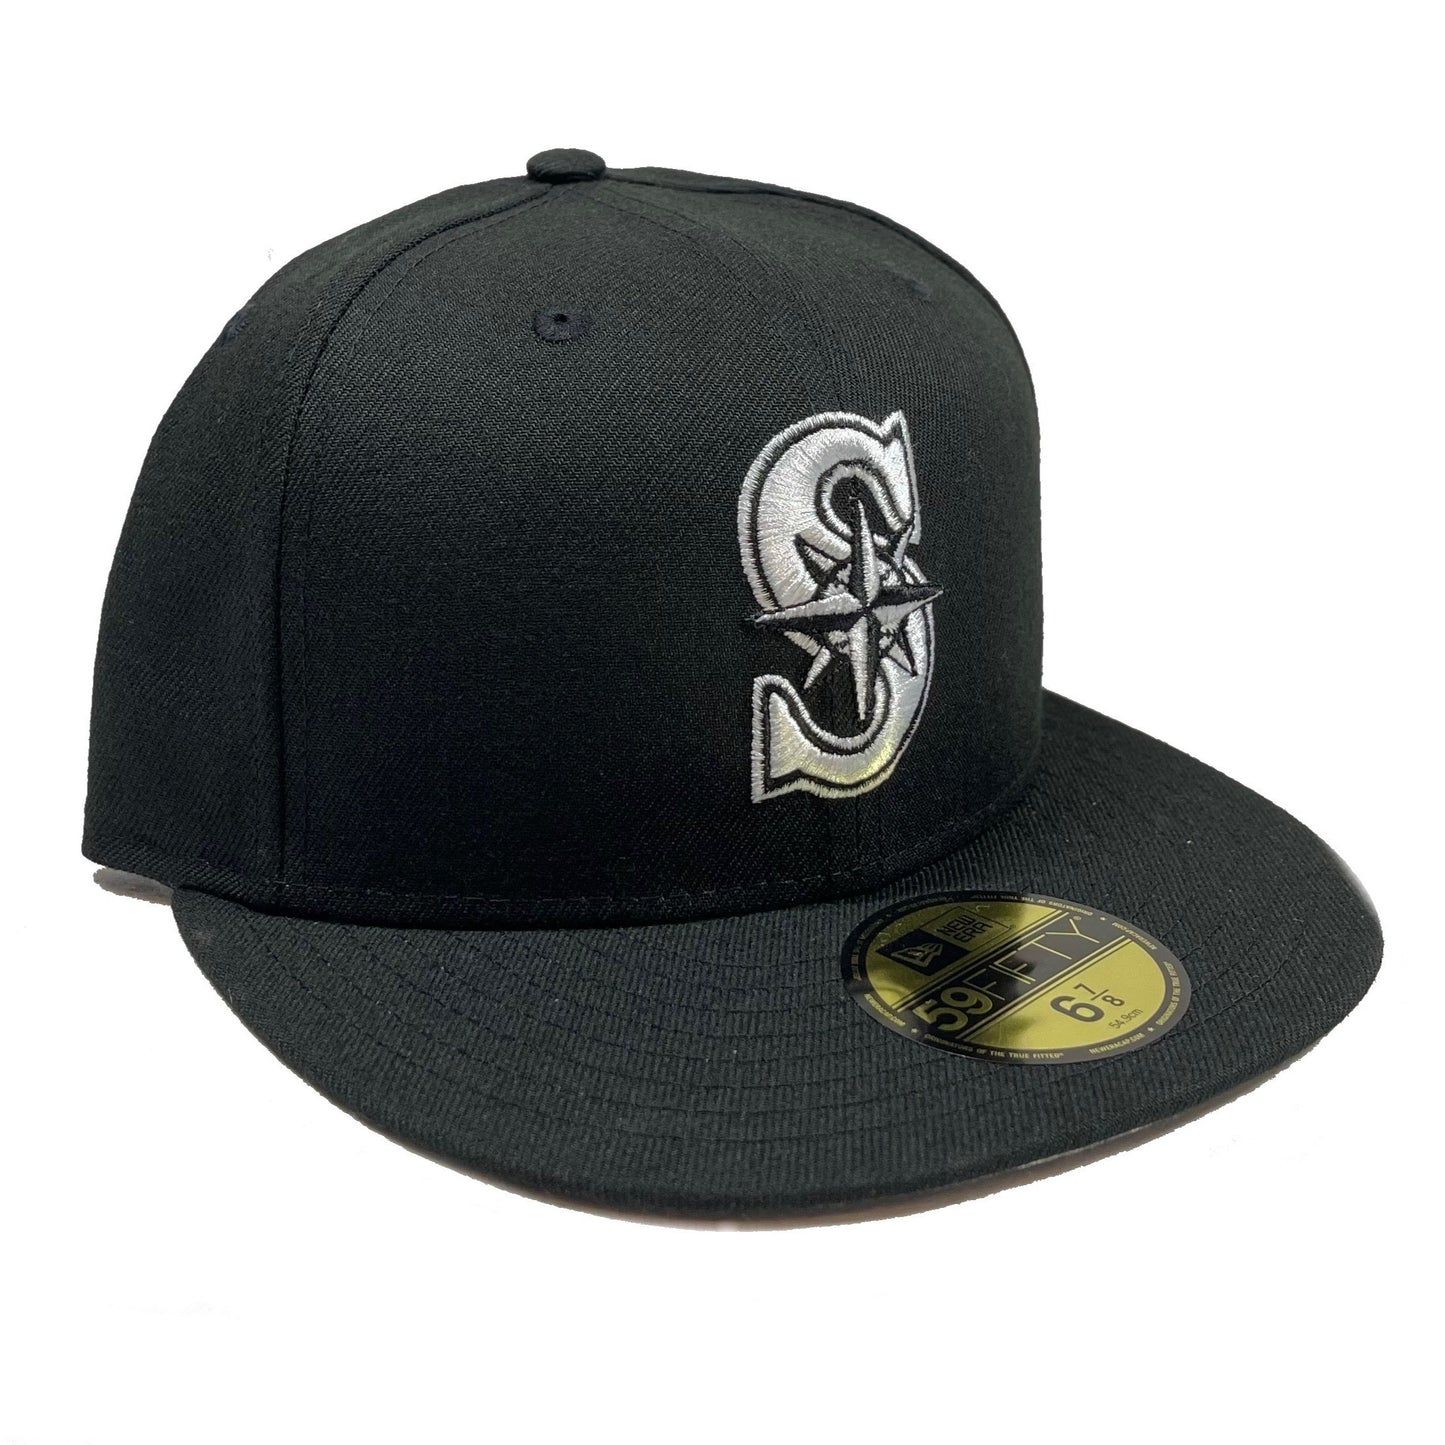 Seattle Mariners (Black) Fitted